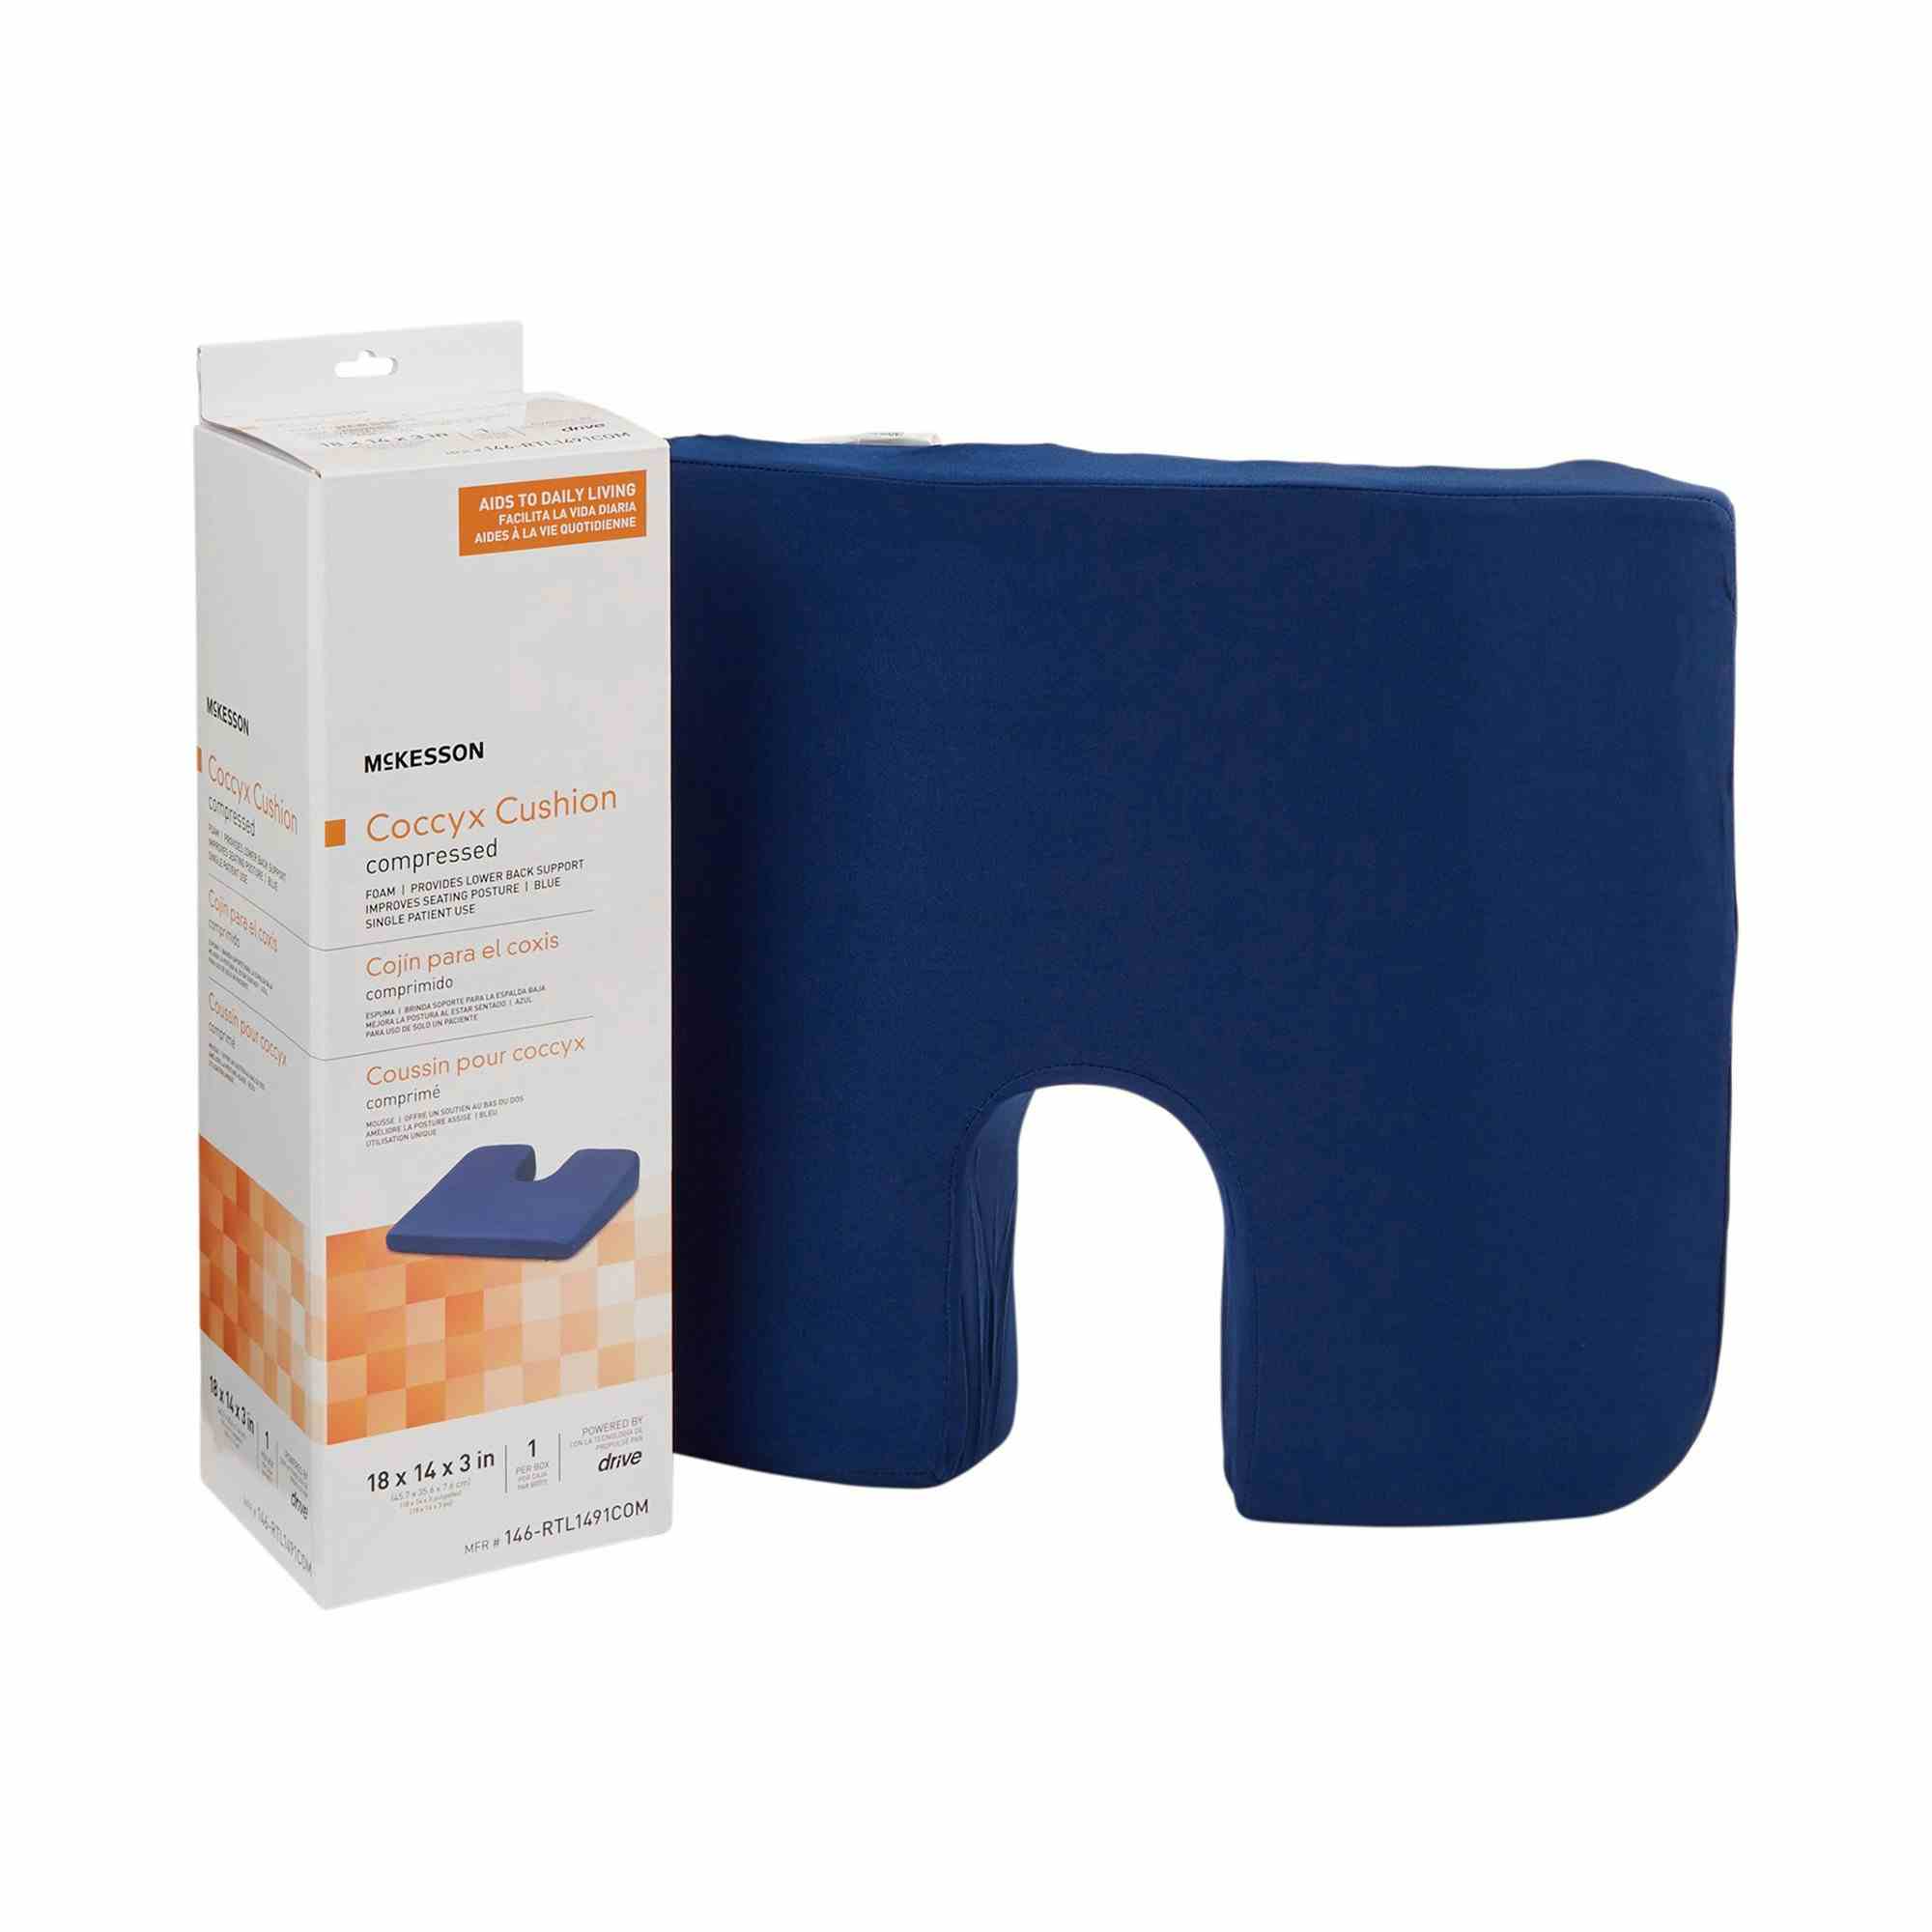 McKesson Foam Coccyx Support Seat Cushion, 146-RTL1491COM,  18 in x 14 in x 3 in - Case of 4